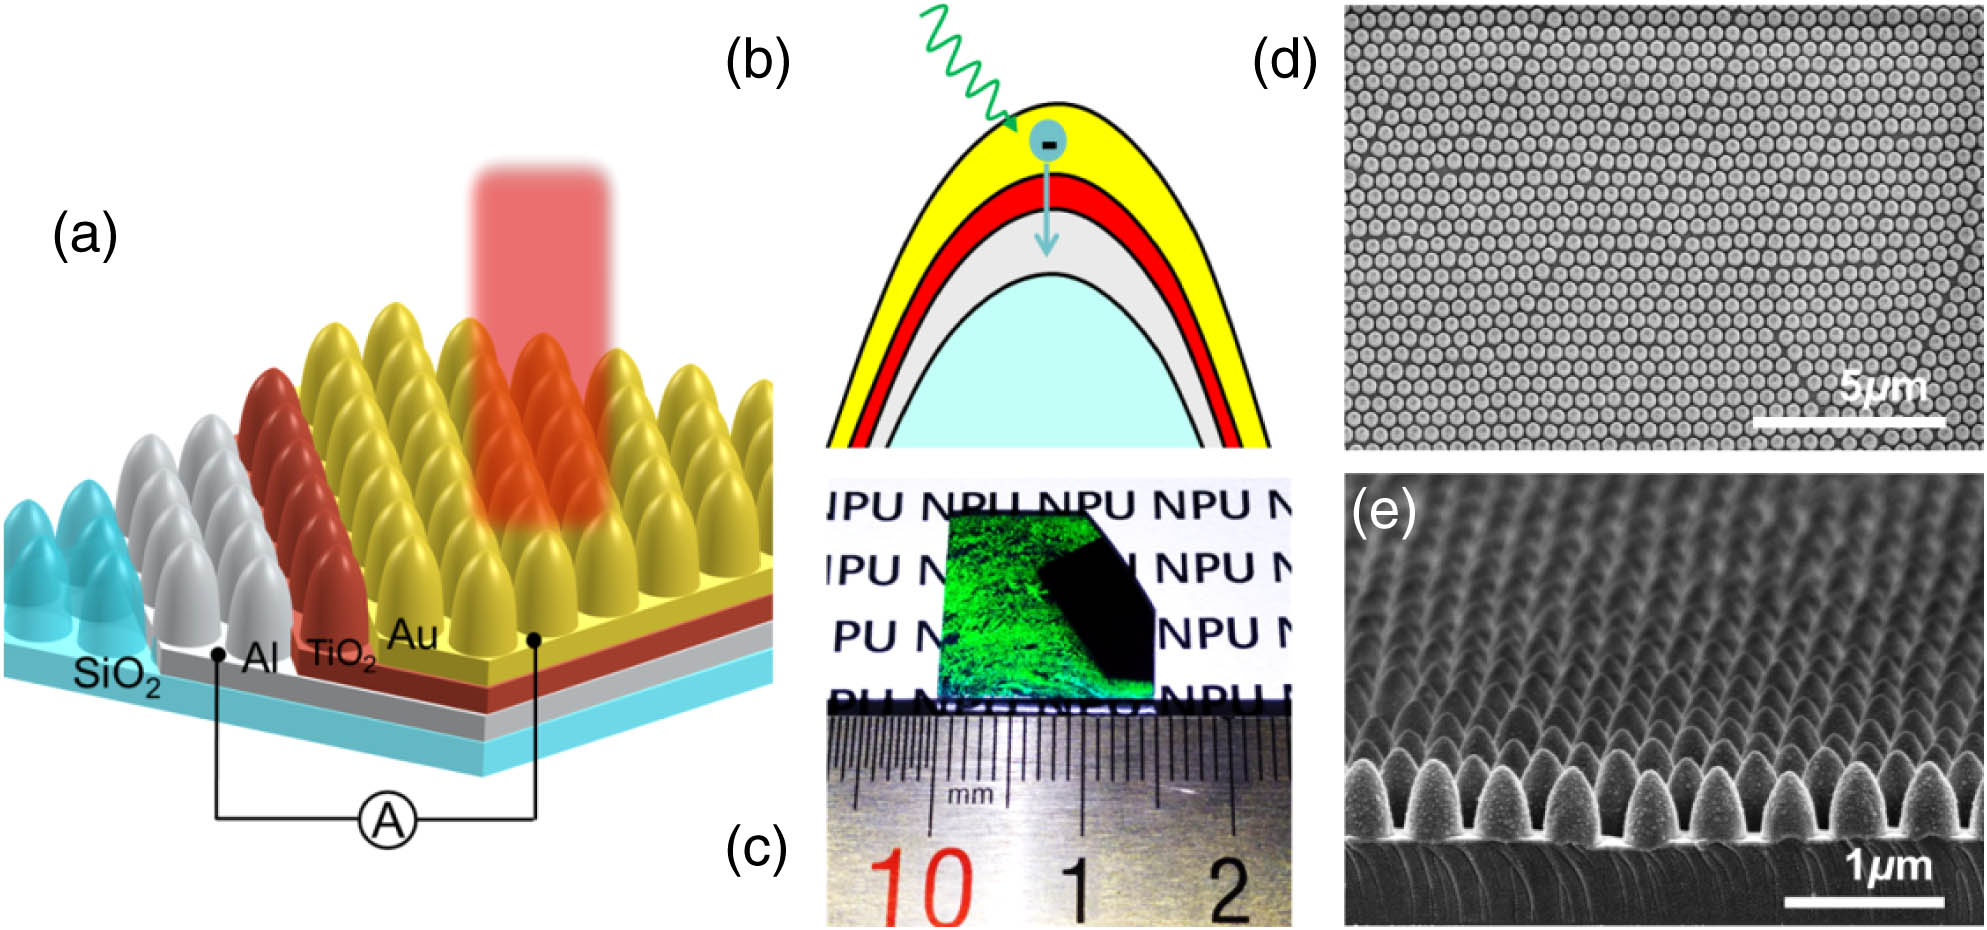 Device architecture and principle of operation. (a) Representation of the NCA photodetector. Light impinges on the top Au film, exciting hot electrons through SP generation. The color of the cones corresponds to the layer with the same color shown in (b). (b) Transport process of hot electrons. (c) Etched silicon dioxide with a 400 nm PS nanosphere mask on a 1.5 cm×1.5 cm sample. The green color is due to the reflected light from the nanostructured surface, whereas the dark area is the unetched silicon oxide. (d) Top view and (e) cross-sectional SEM image of the final device.